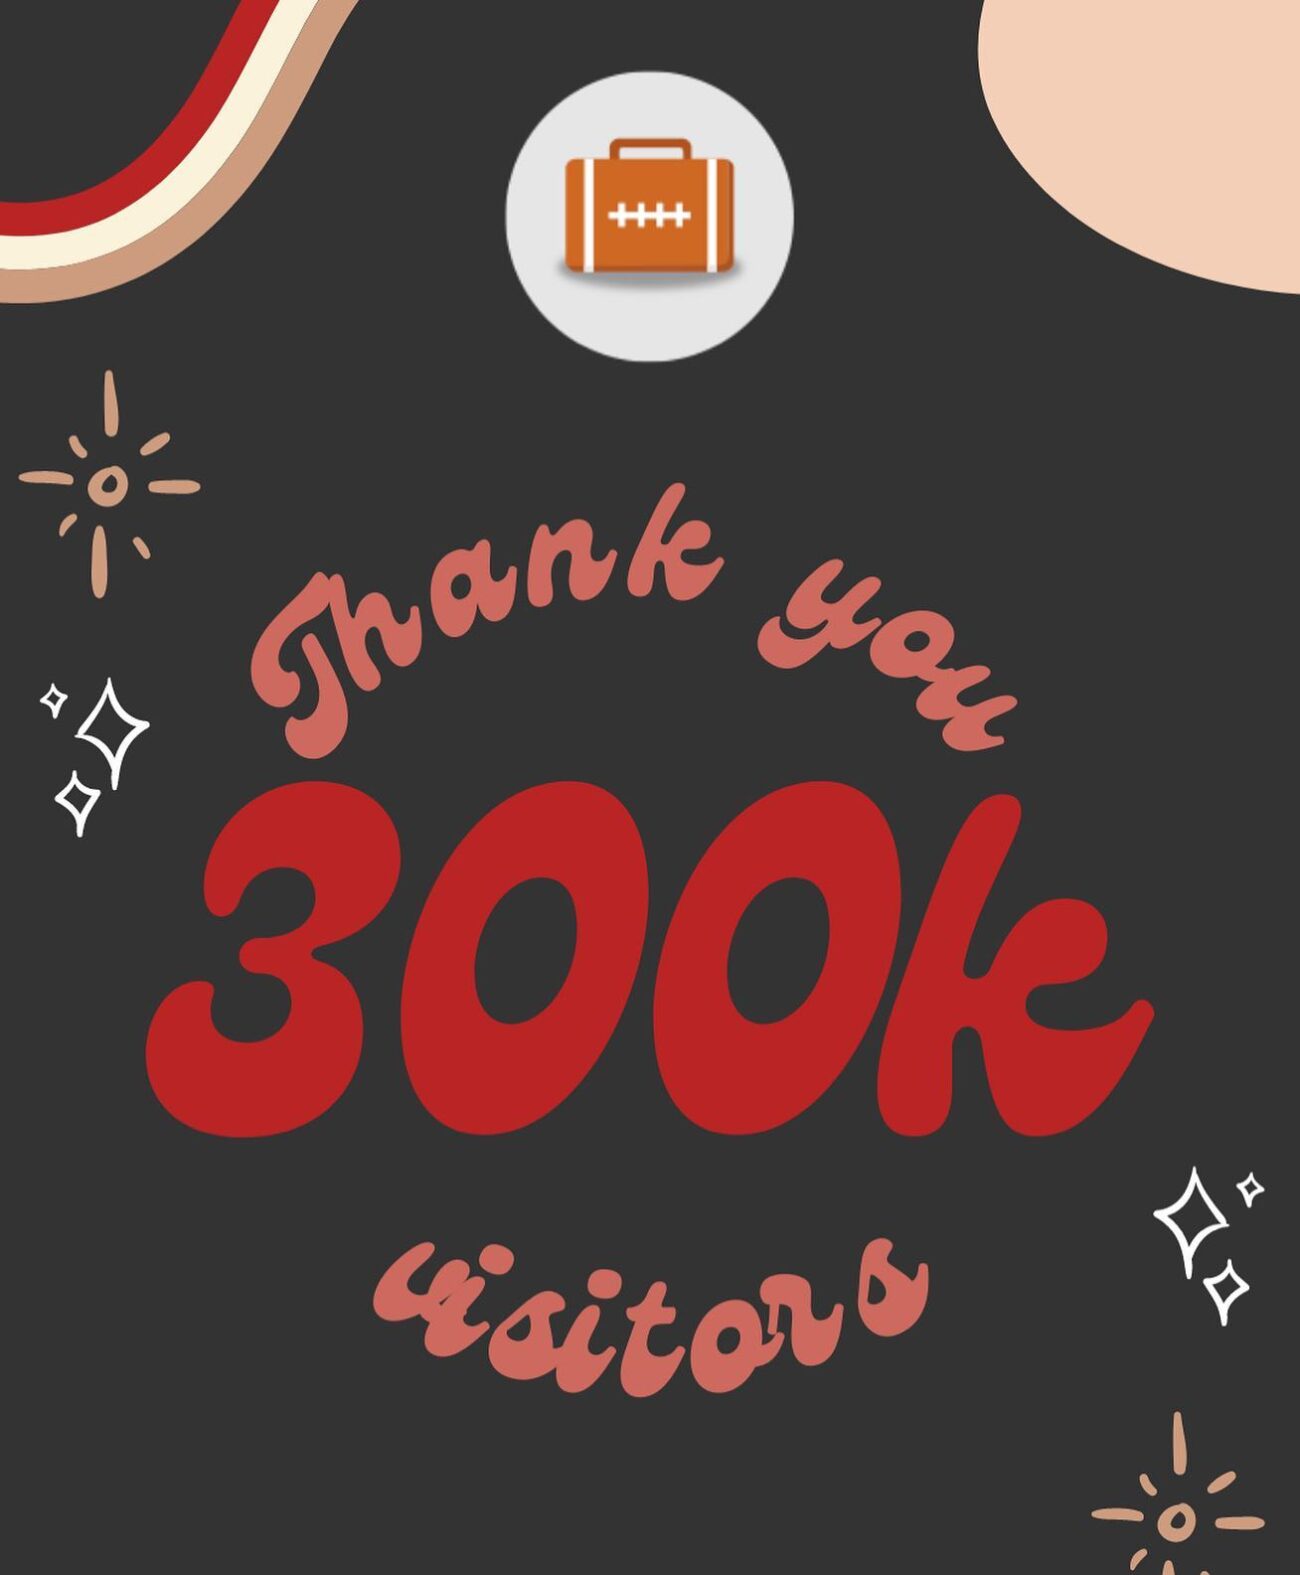 Again, a giant thank you to everyone who has visited Itinerant Fan over the last year. You made 2021 our best year ever, and now it’s on me to give y’all reasons to come back. I’m working hard on that and hope to roll out some cool new content soon!#blogger #bloggerlife #sportsblog #travelblogger #seo #sportstravel #sportstourism